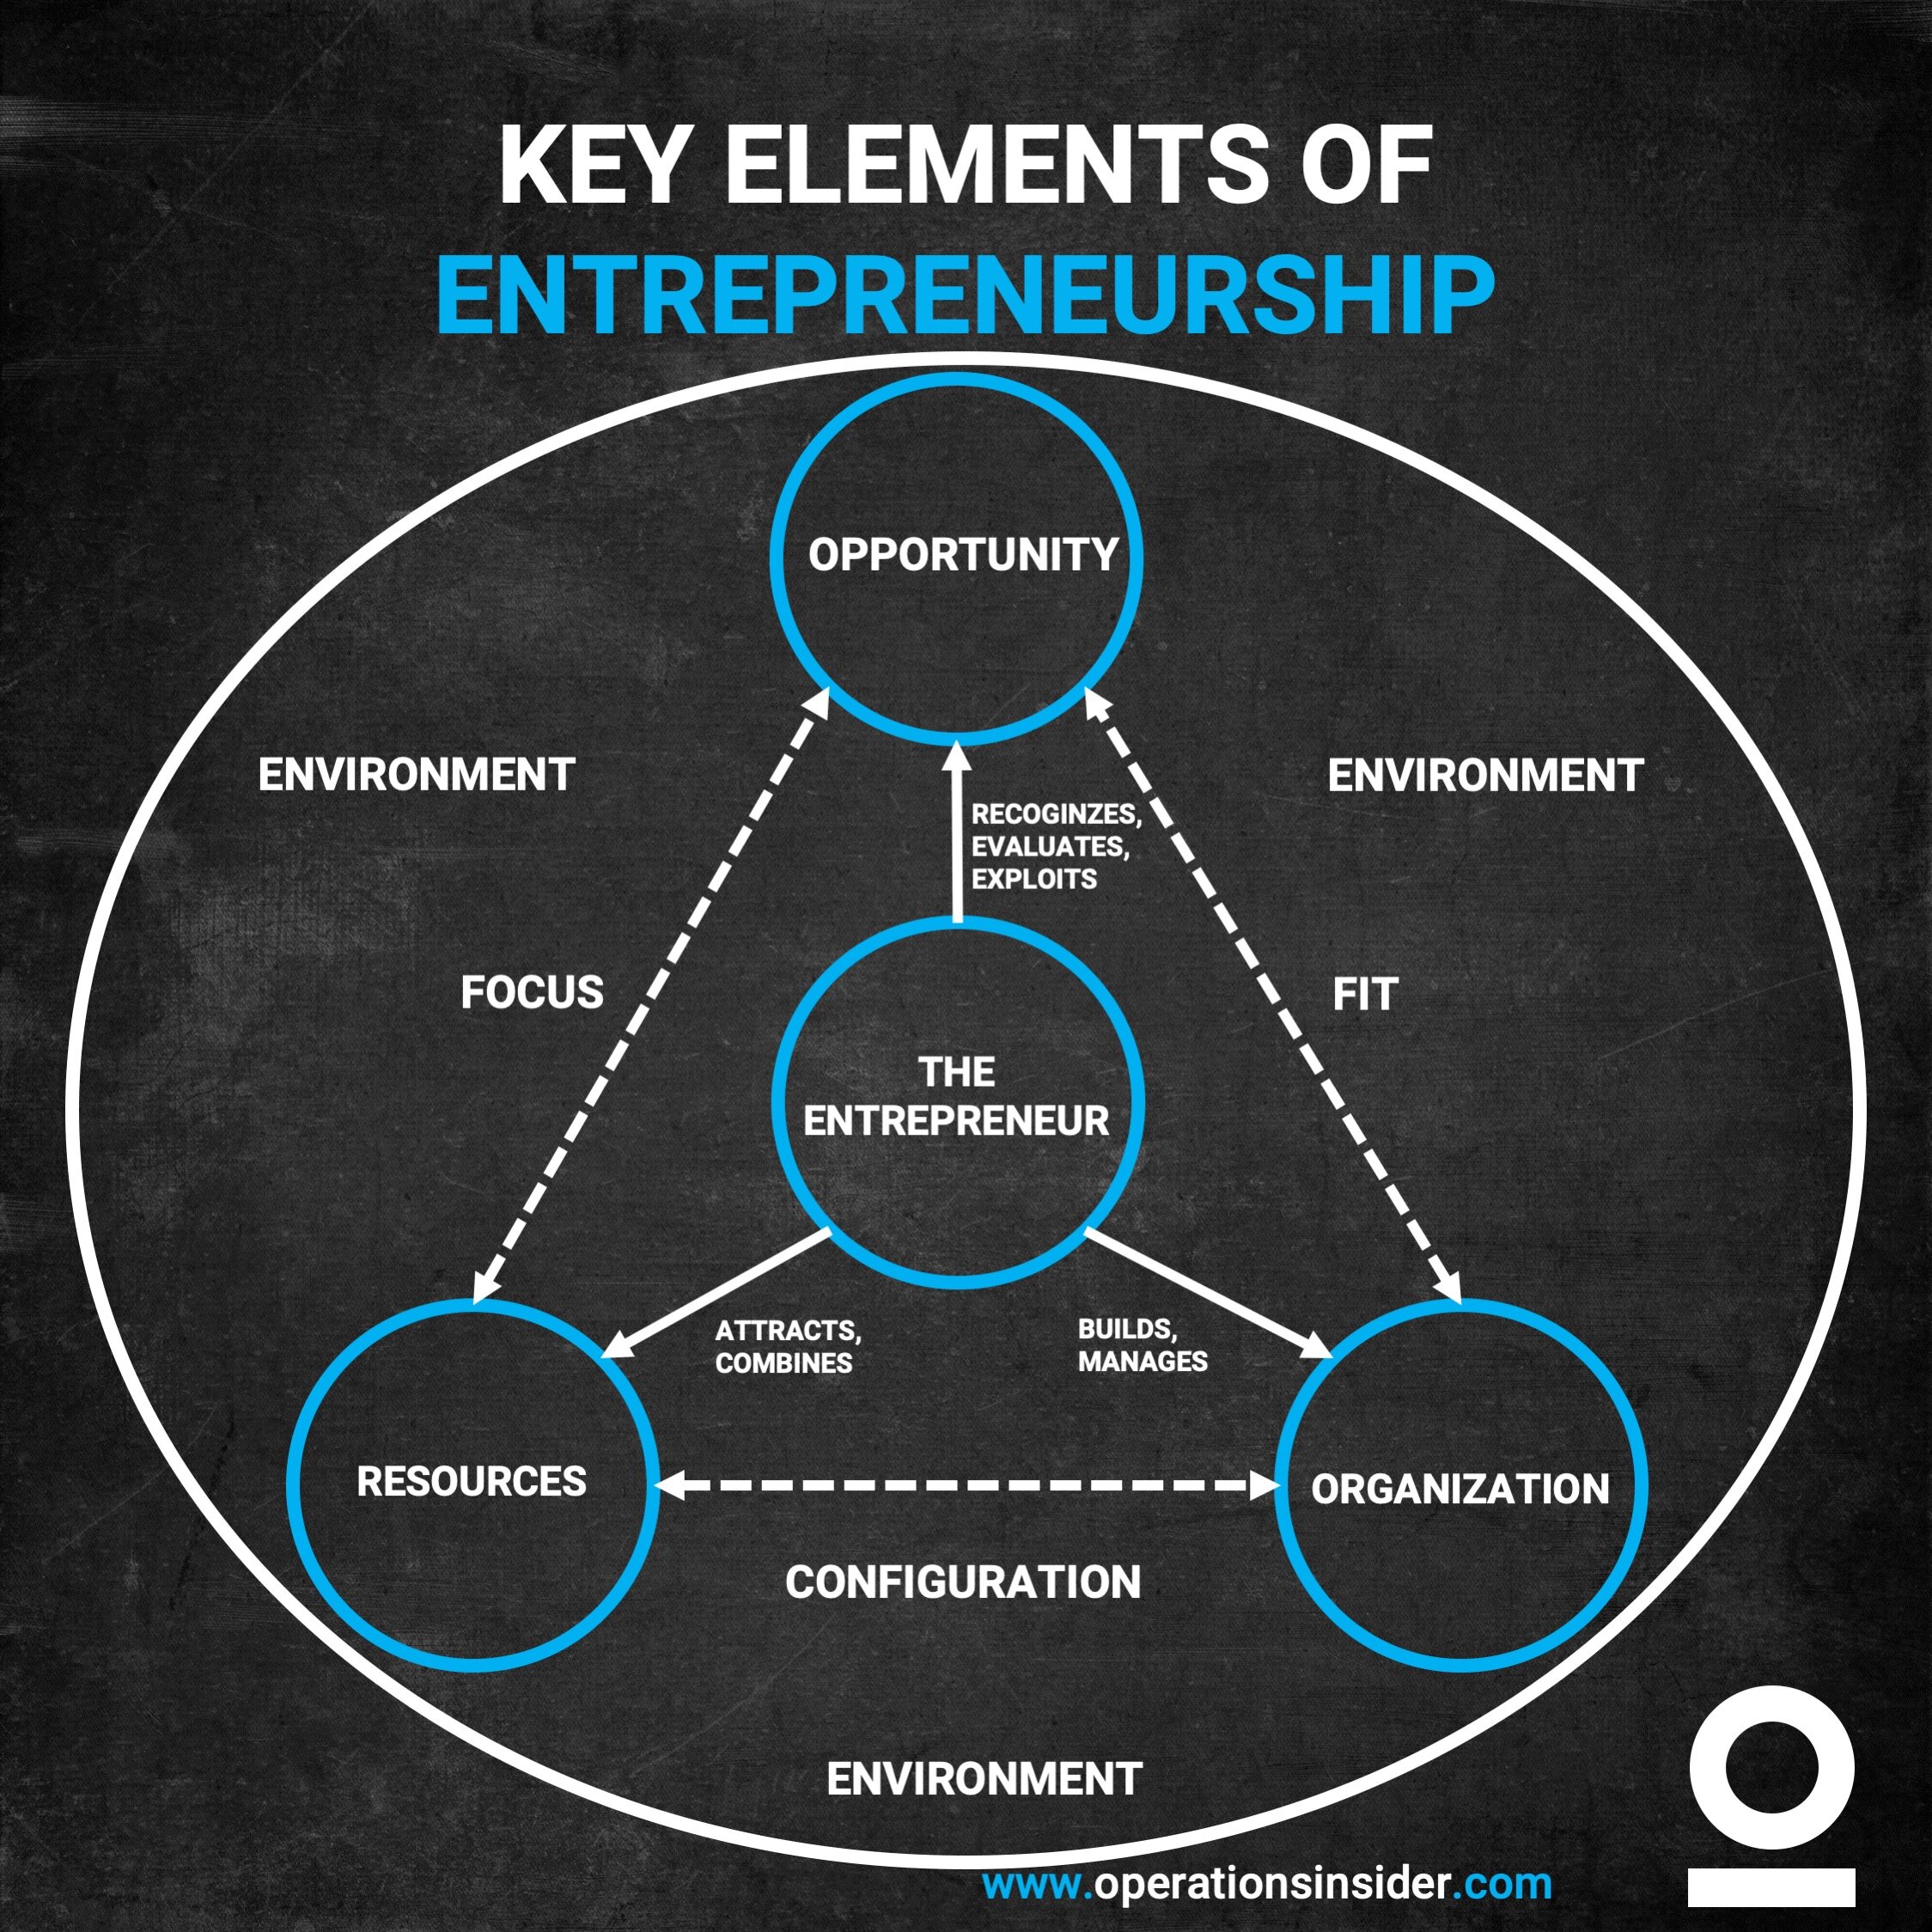 research on entrepreneurship has shown which of the following